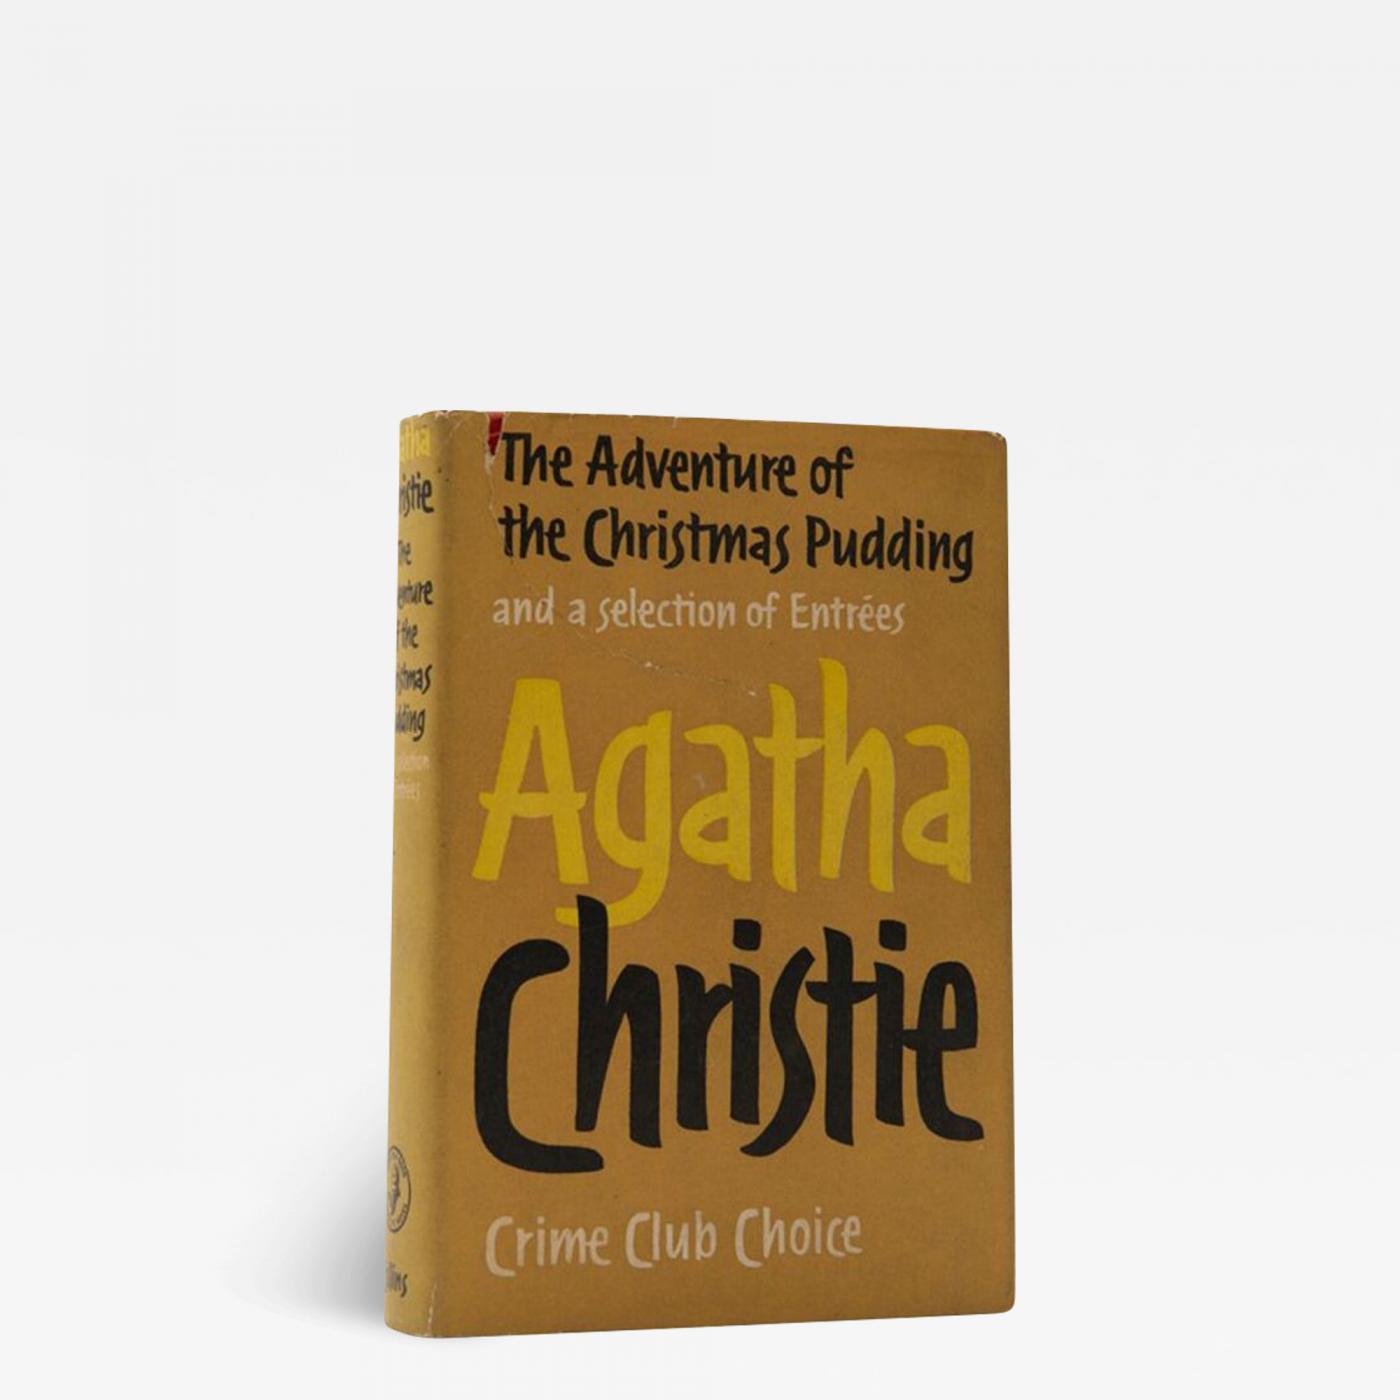 The Adventure of the Christmas Pudding. by AGATHA CHRISTIE